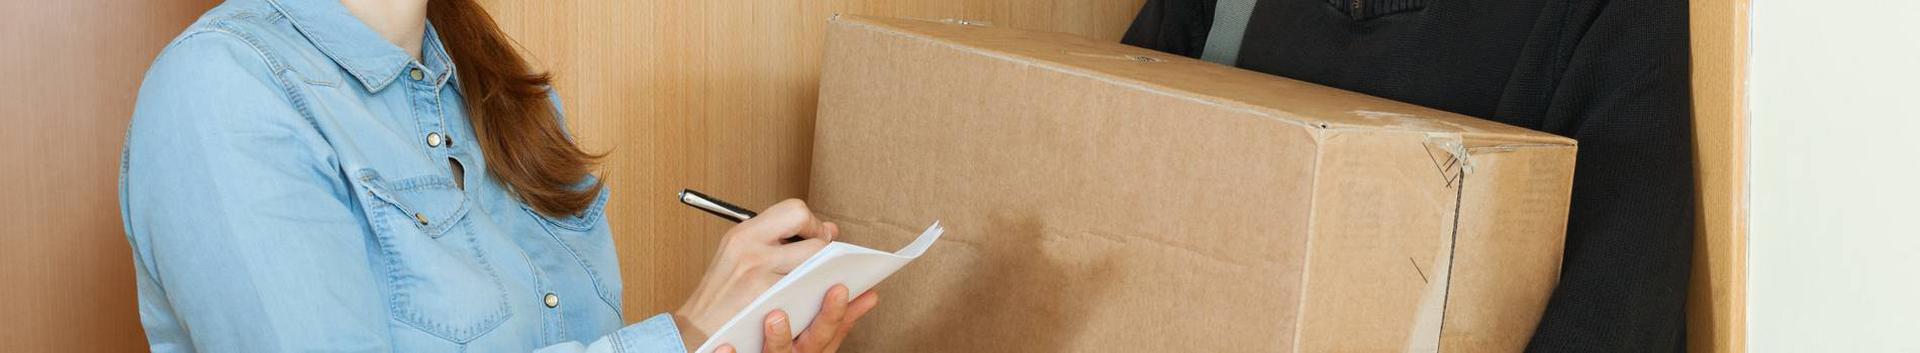 Shipping, transport and courier services